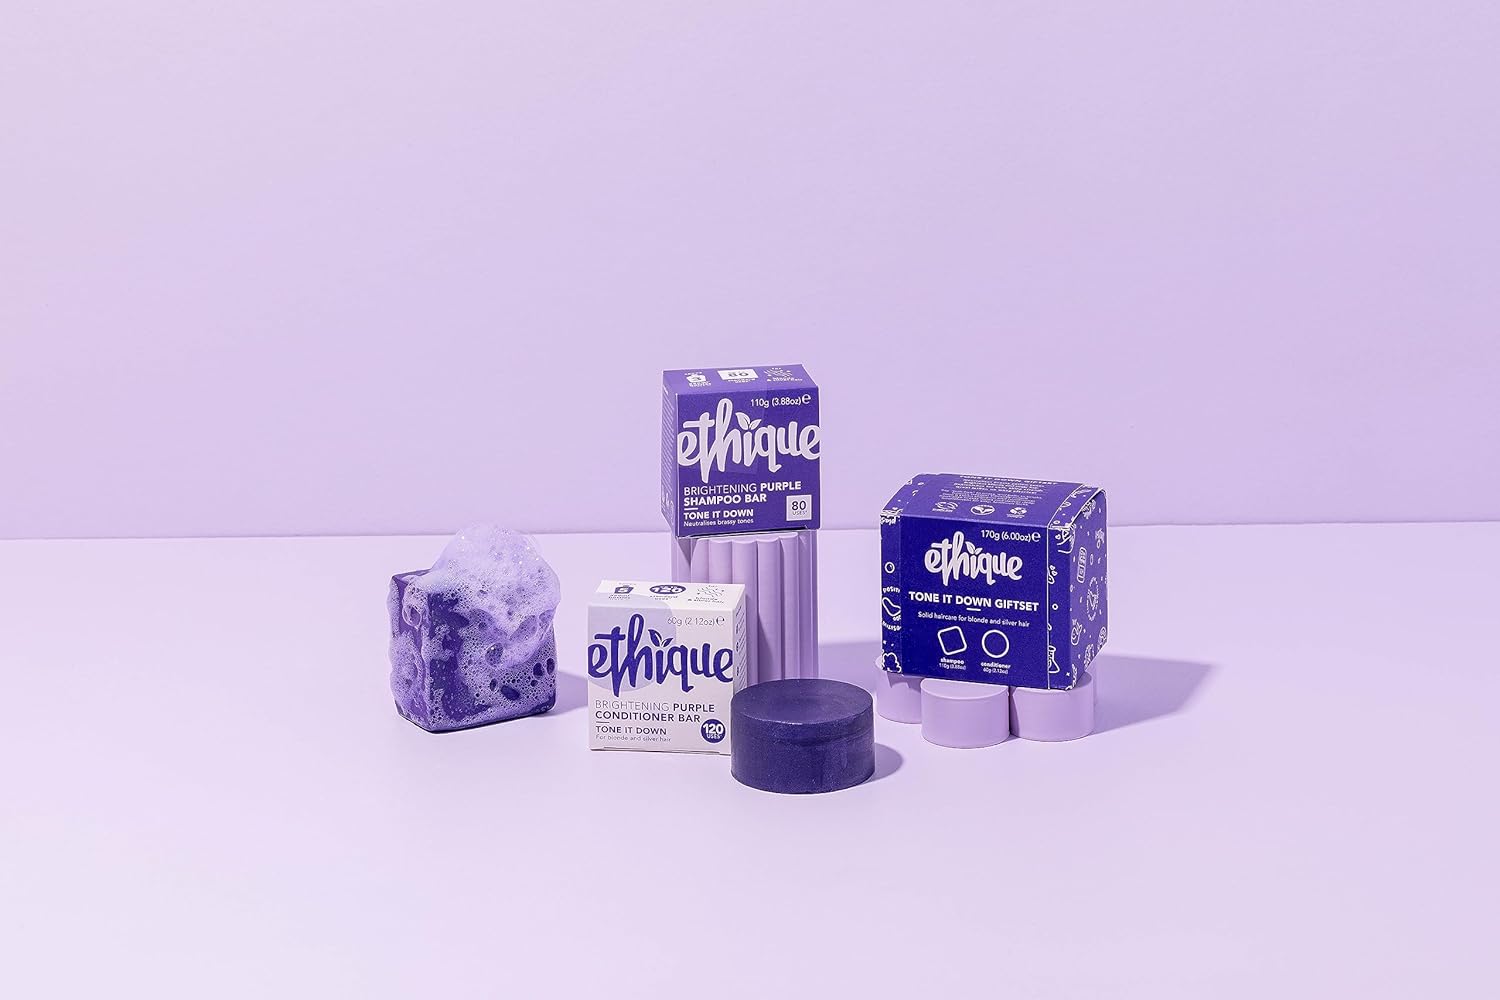 Ethique Tone it Down Giftpack - Purple Shampoo for Blonde Hair and Gray Hair & Conditioner Bar Set - Vegan, Eco-Friendly, Plastic-Free, Cruelty-Free 6 oz (Set of 2) : Beauty & Personal Care